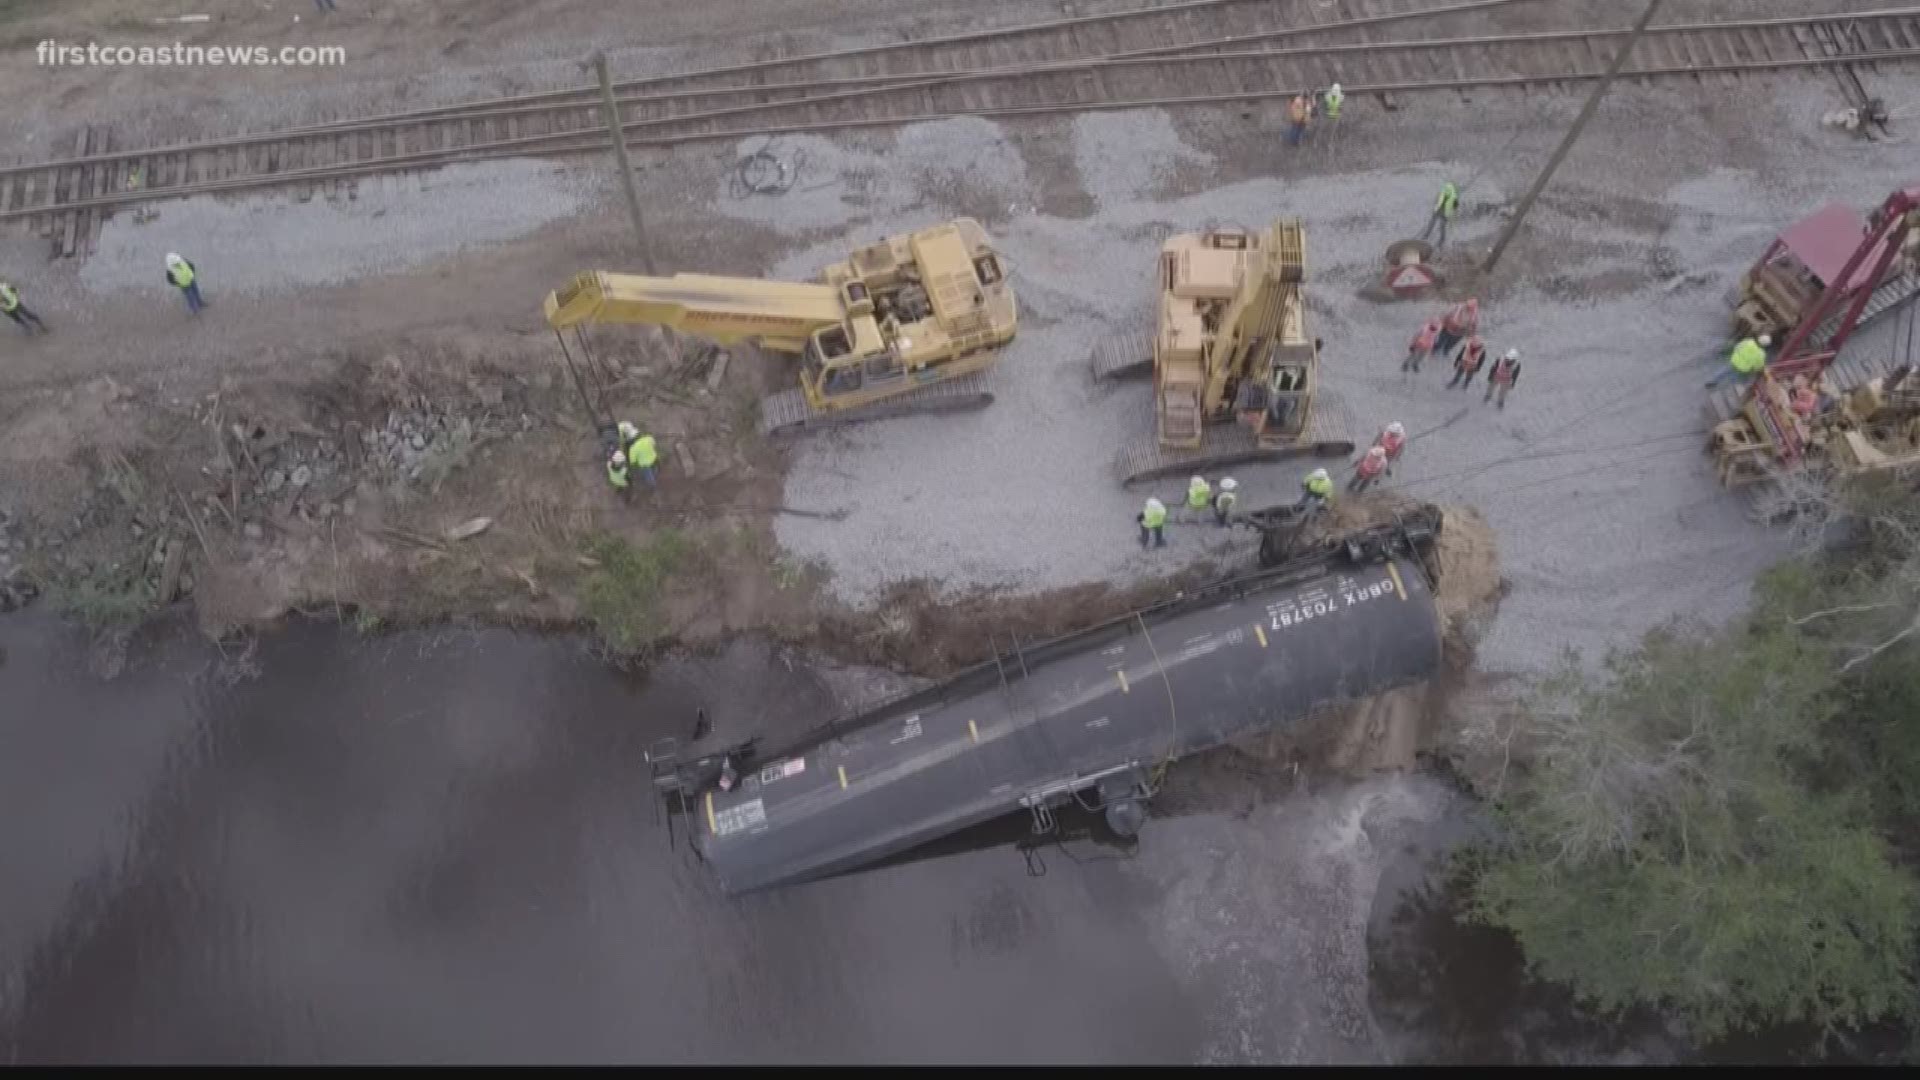 CSX employees have removed one tanker holding approximately 30,000 gallons of ethanol out of Cabin Creek following Sunday's derailment. One  tank remains in the water.